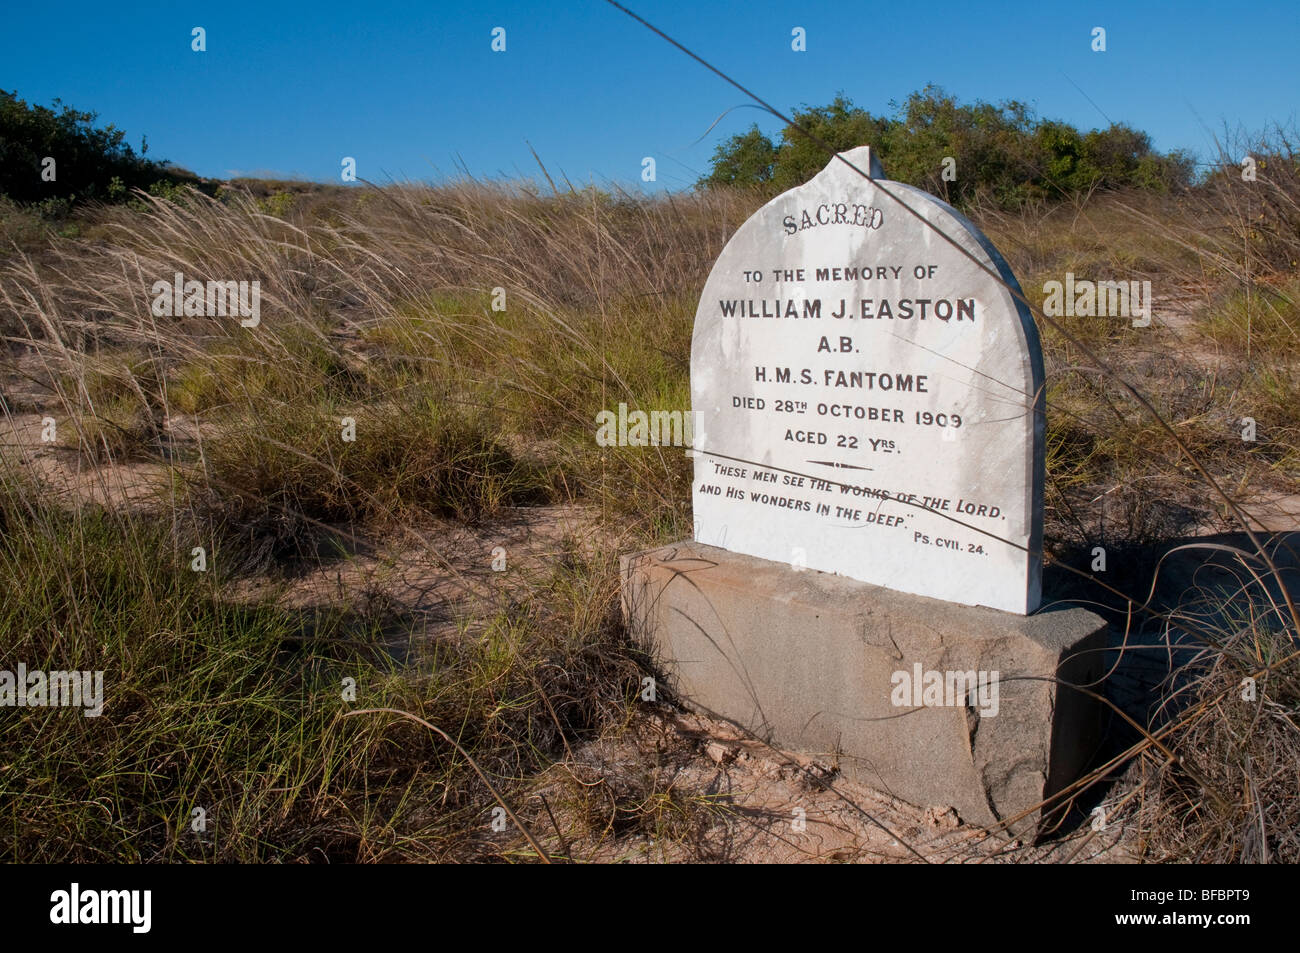 The lonely grave of a young Royal Navy seaman, William Easton from the HMS Fantome who died in 1909, on the West Australian coast near Broome Stock Photo